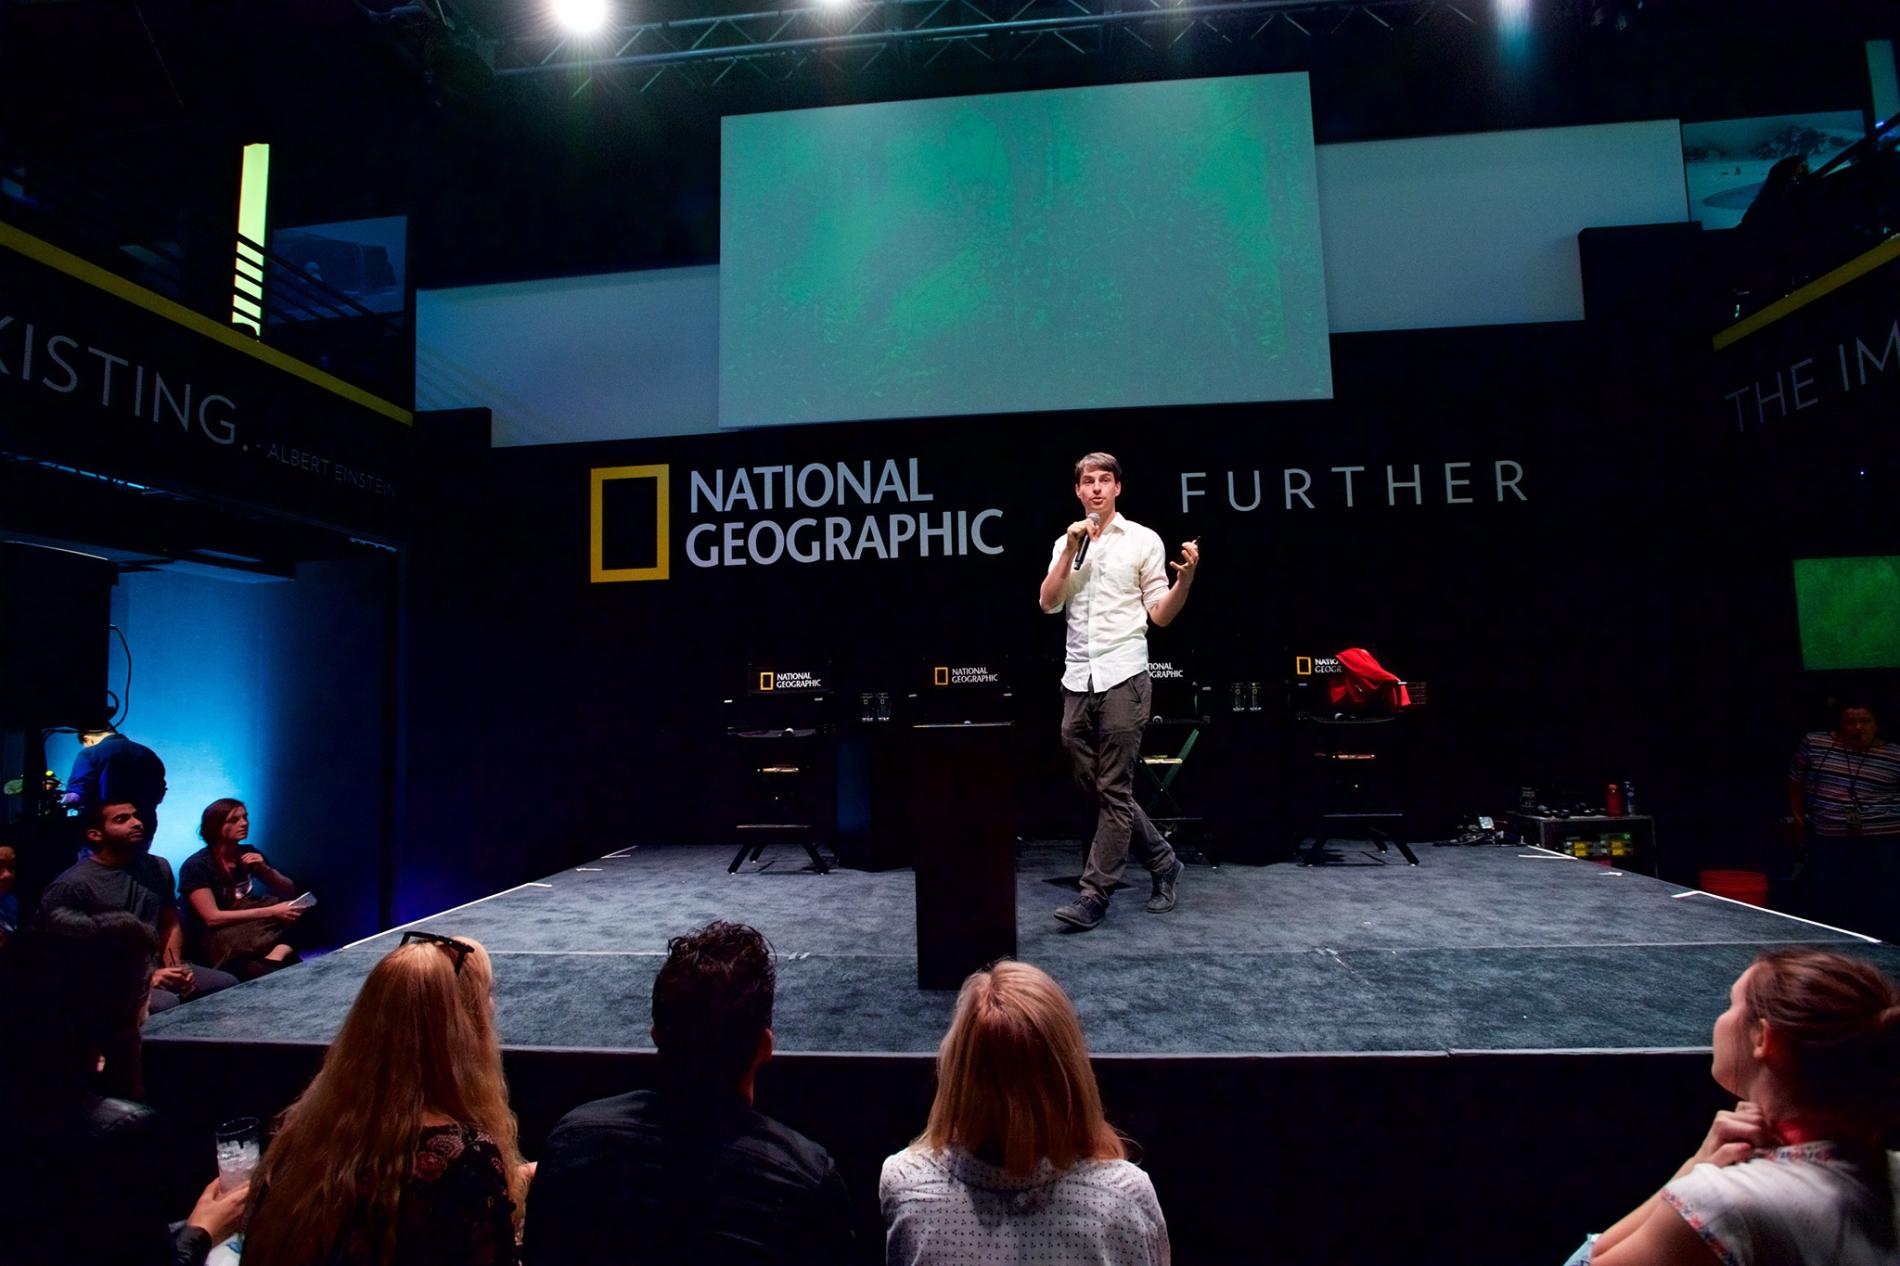 White spoke at National Geographic's "Further Base Camp" earlier this year in Austin, Texas.  PHOTOGRAPH BY EARL GIBSON III, GETTY IMAGES FOR NATIONAL GEOGRAPHIC